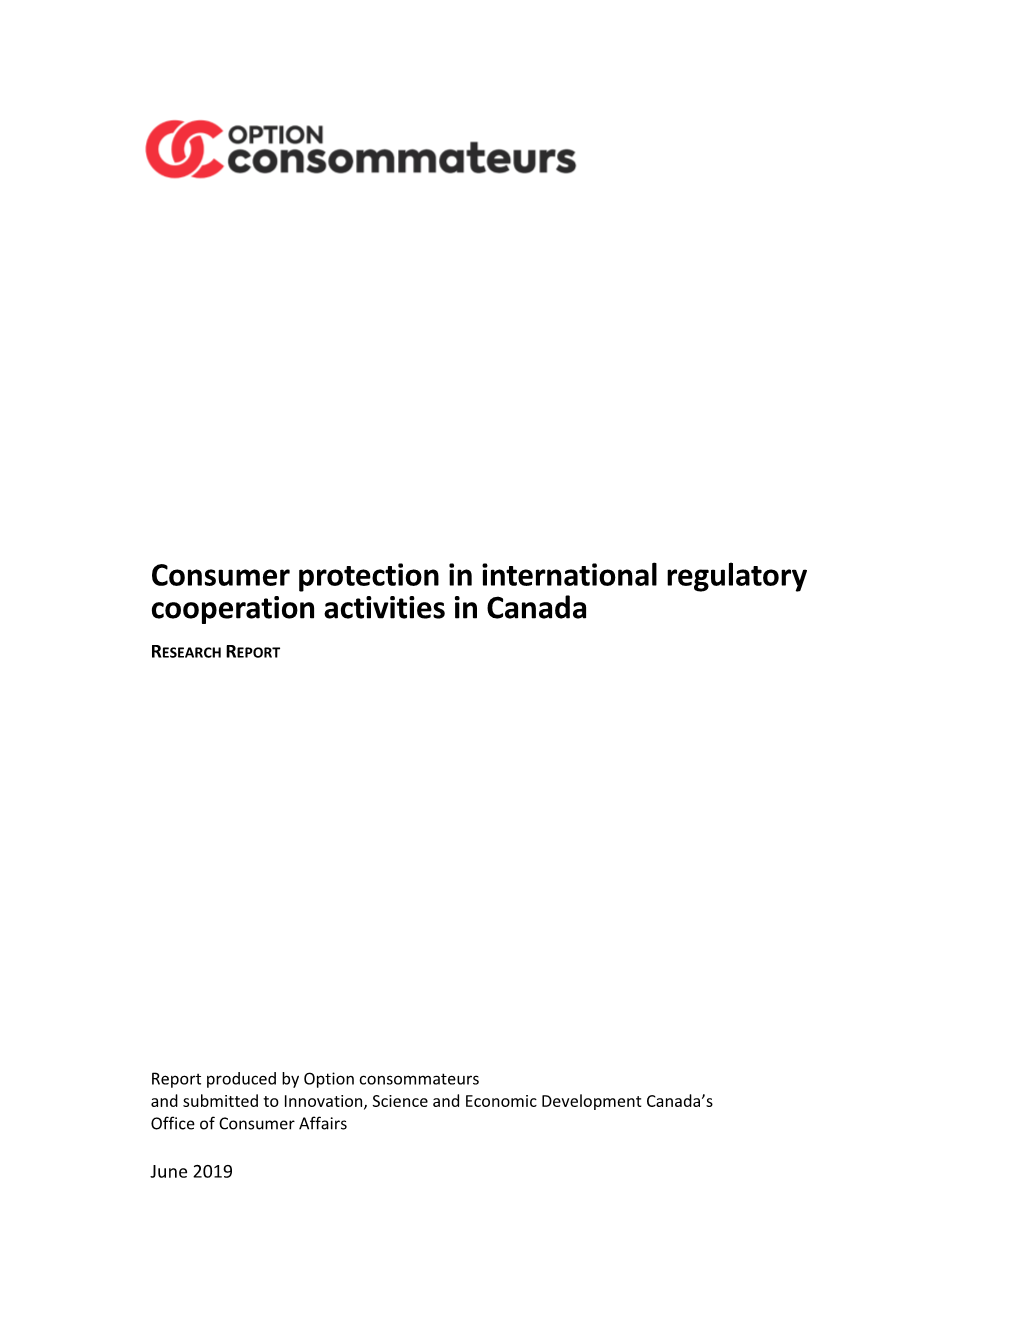 Consumer Protection in International Regulatory Cooperation Activities in Canada